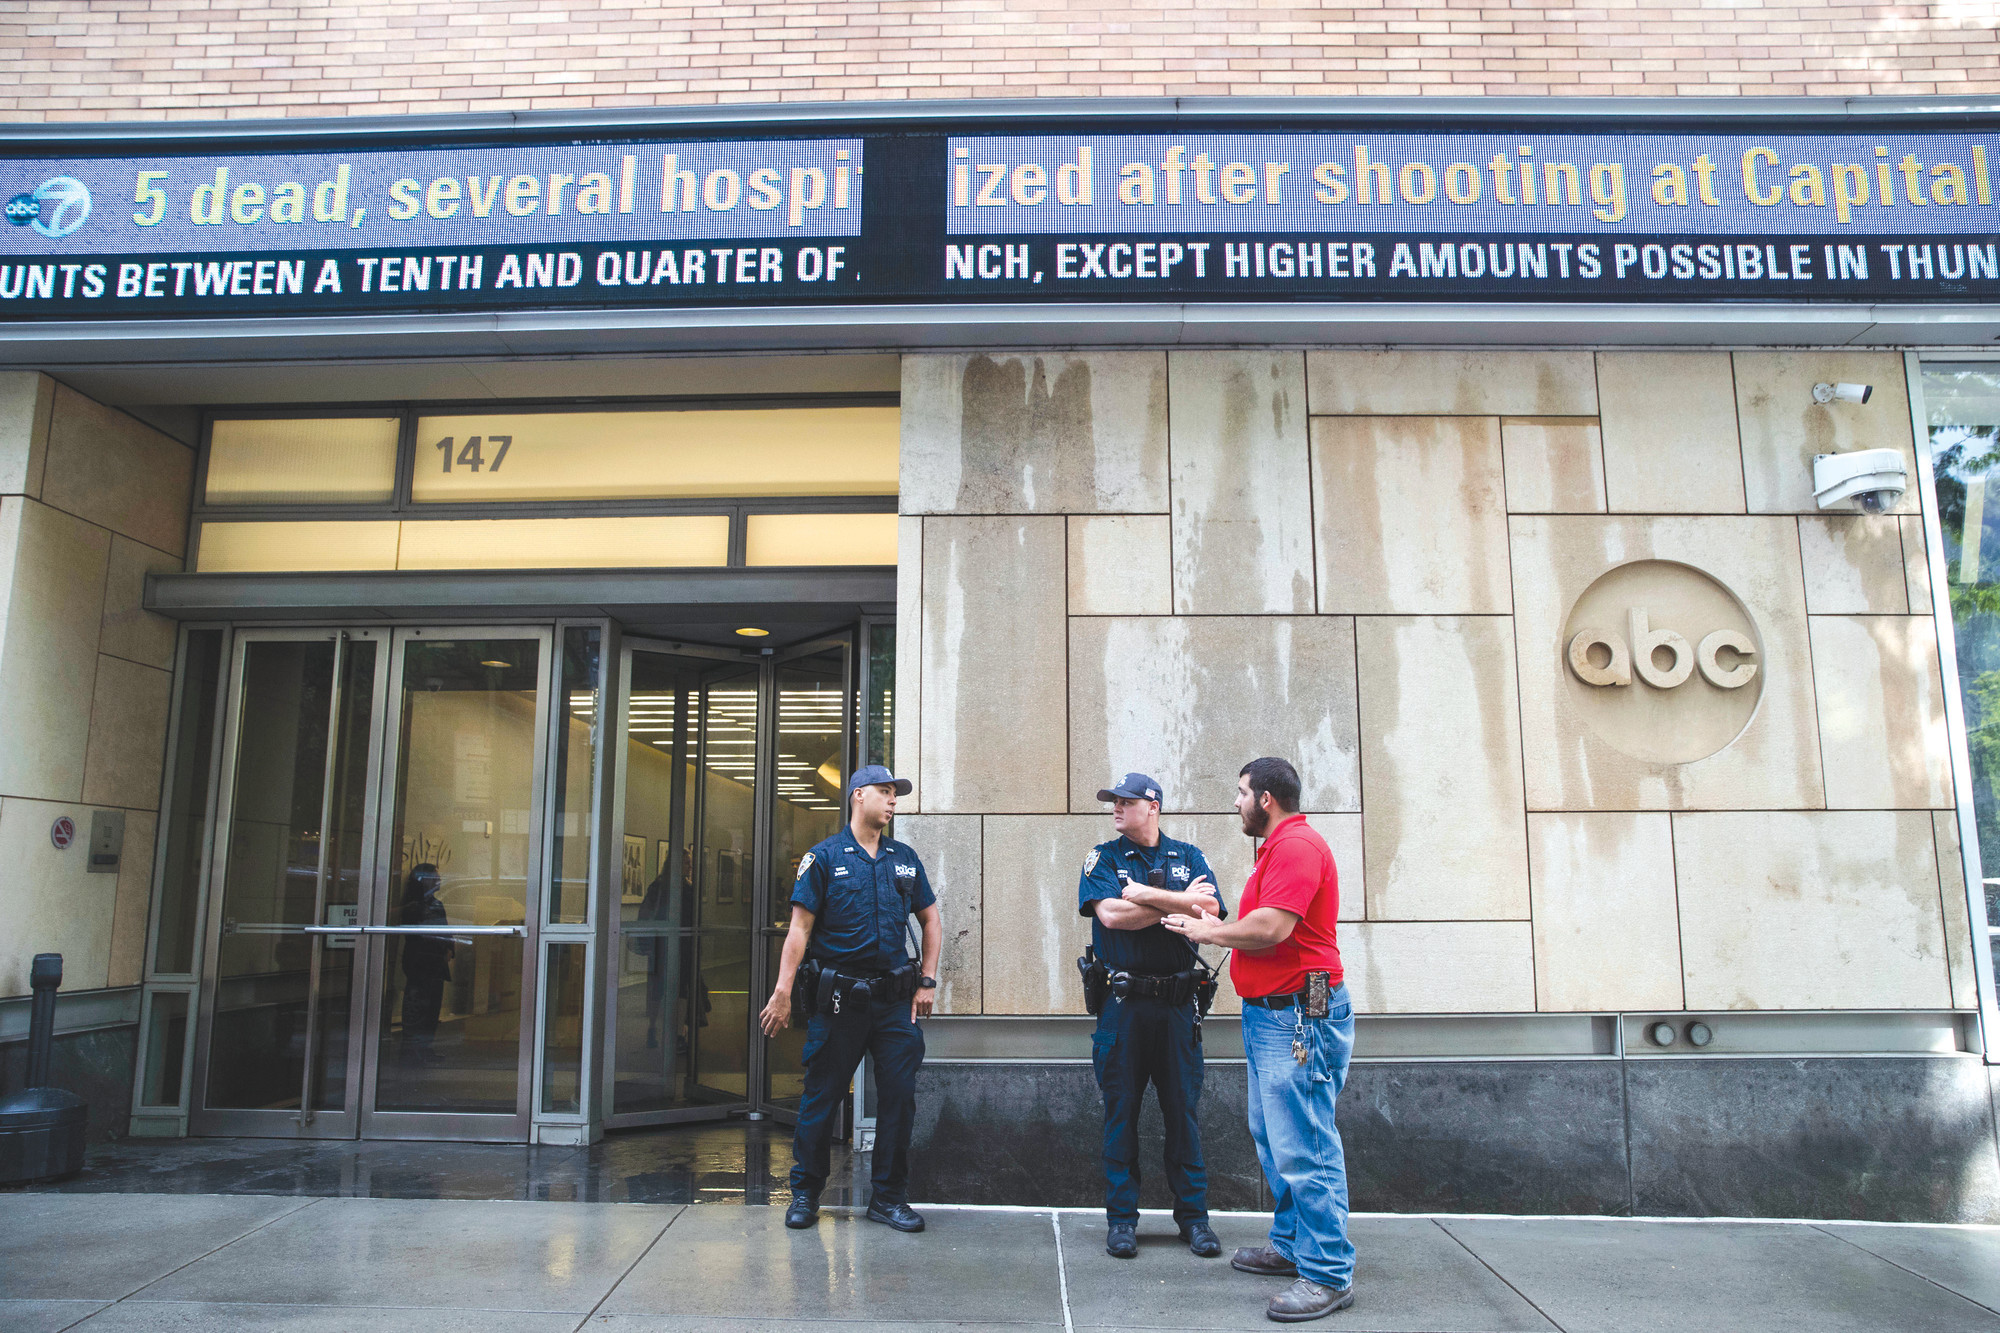 Police officers stand guard outside the ABC studio Thursday in New York.